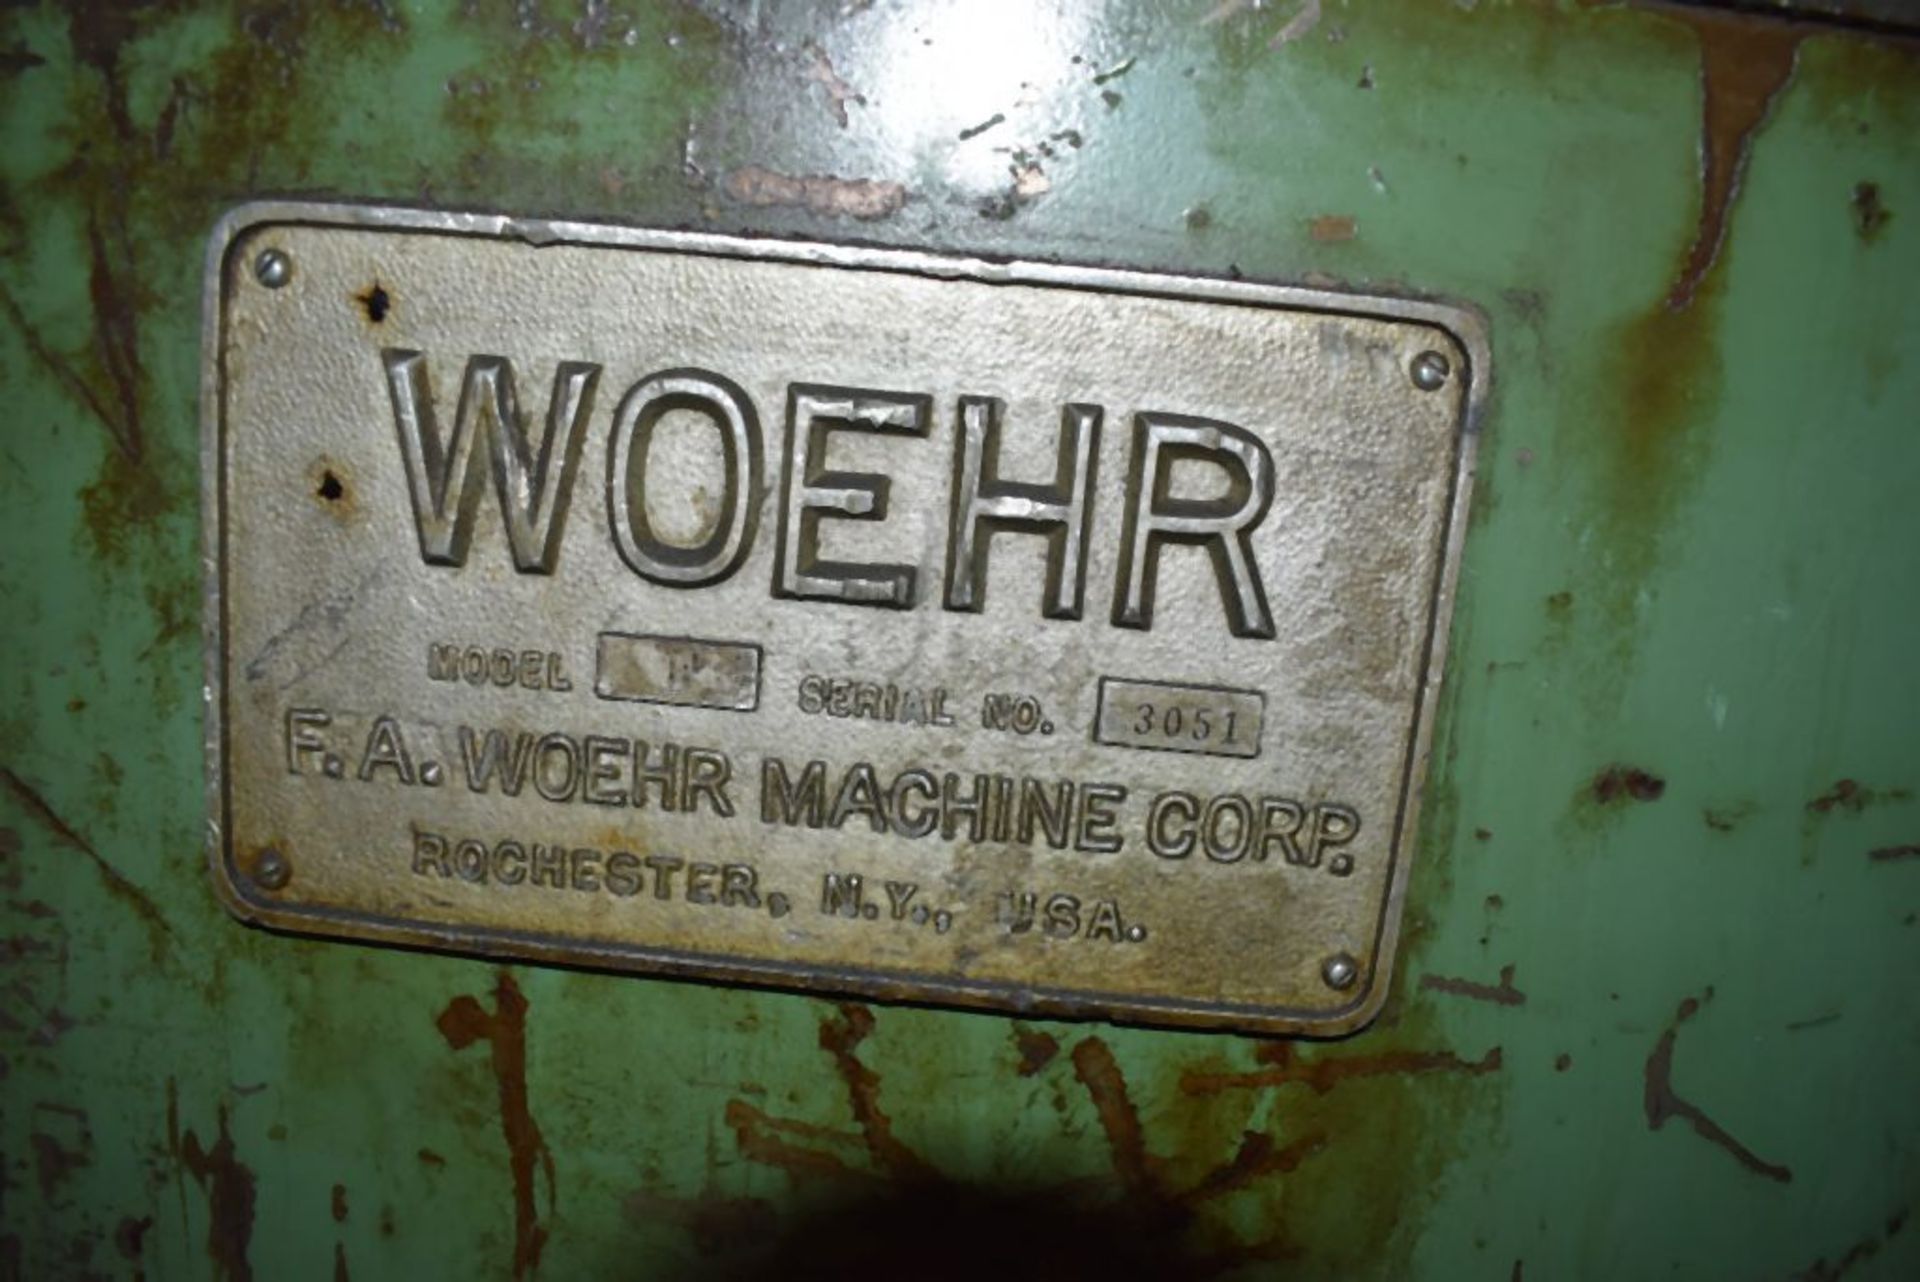 WOEHR MODEL F, S/N: 3051, 19.5", PRECISION LEVELER - Image 2 of 2